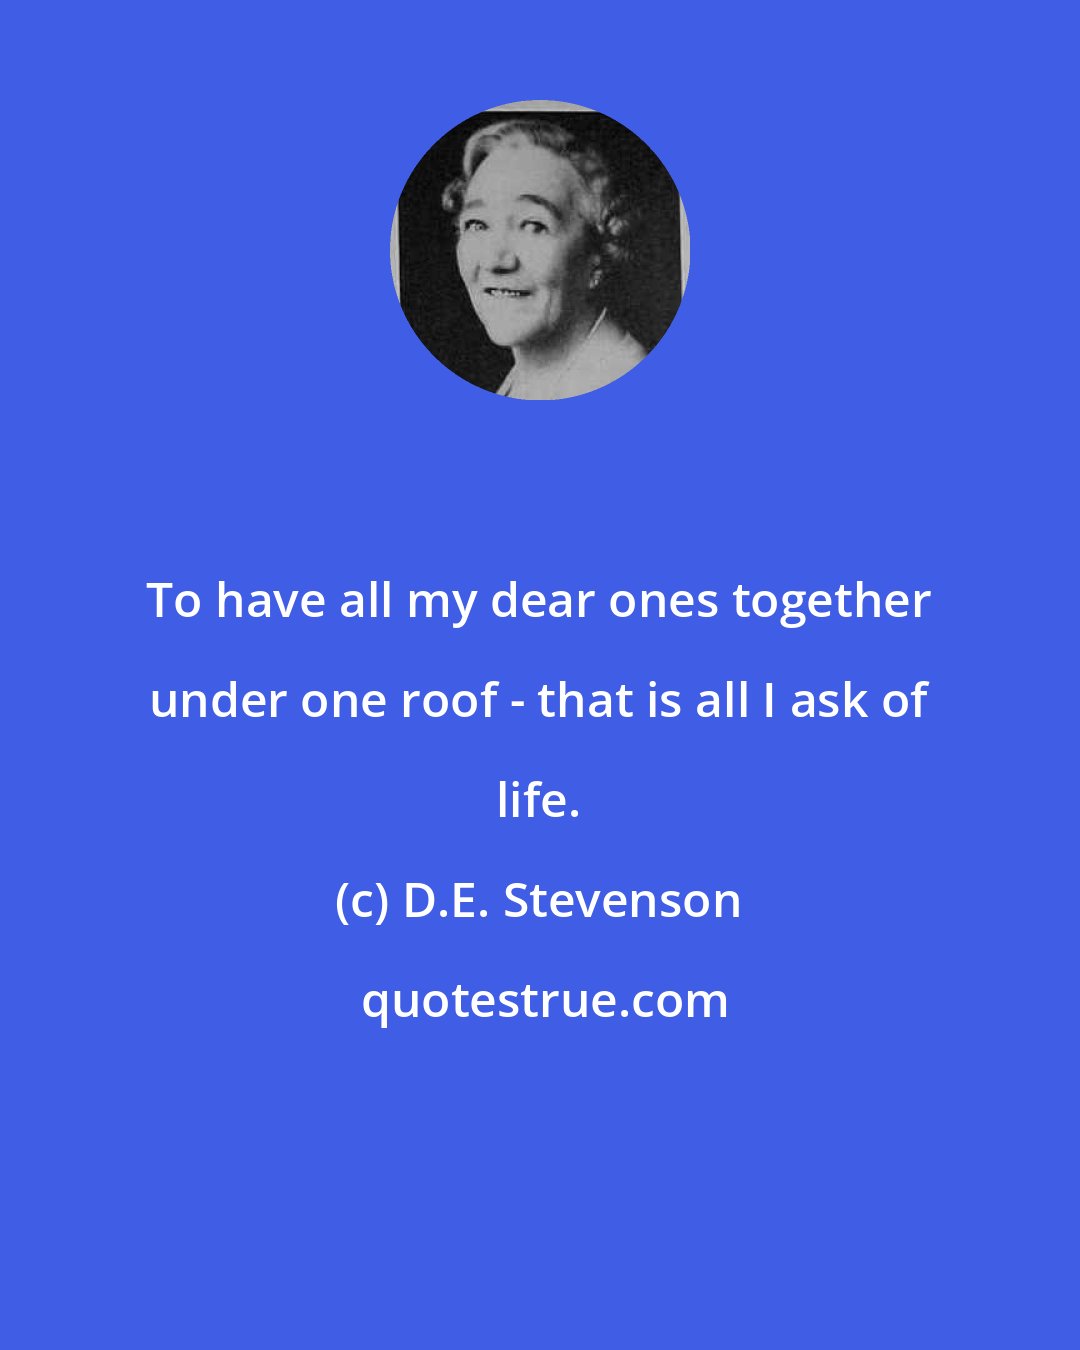 D.E. Stevenson: To have all my dear ones together under one roof - that is all I ask of life.